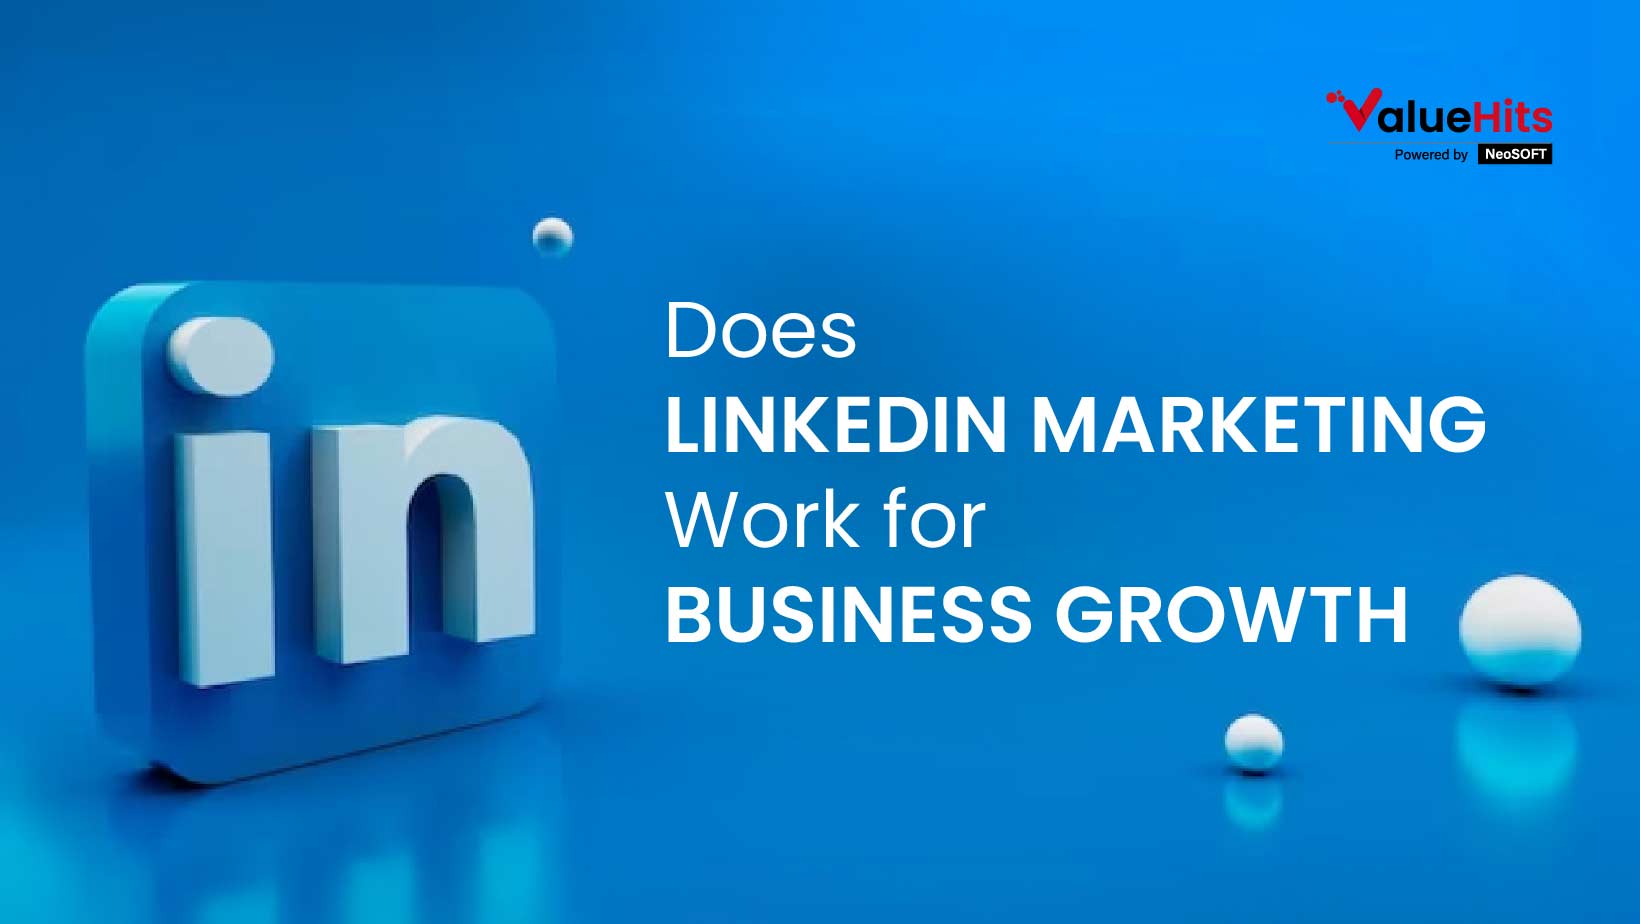 Does LinkedIn Marketing Work for Business Growth